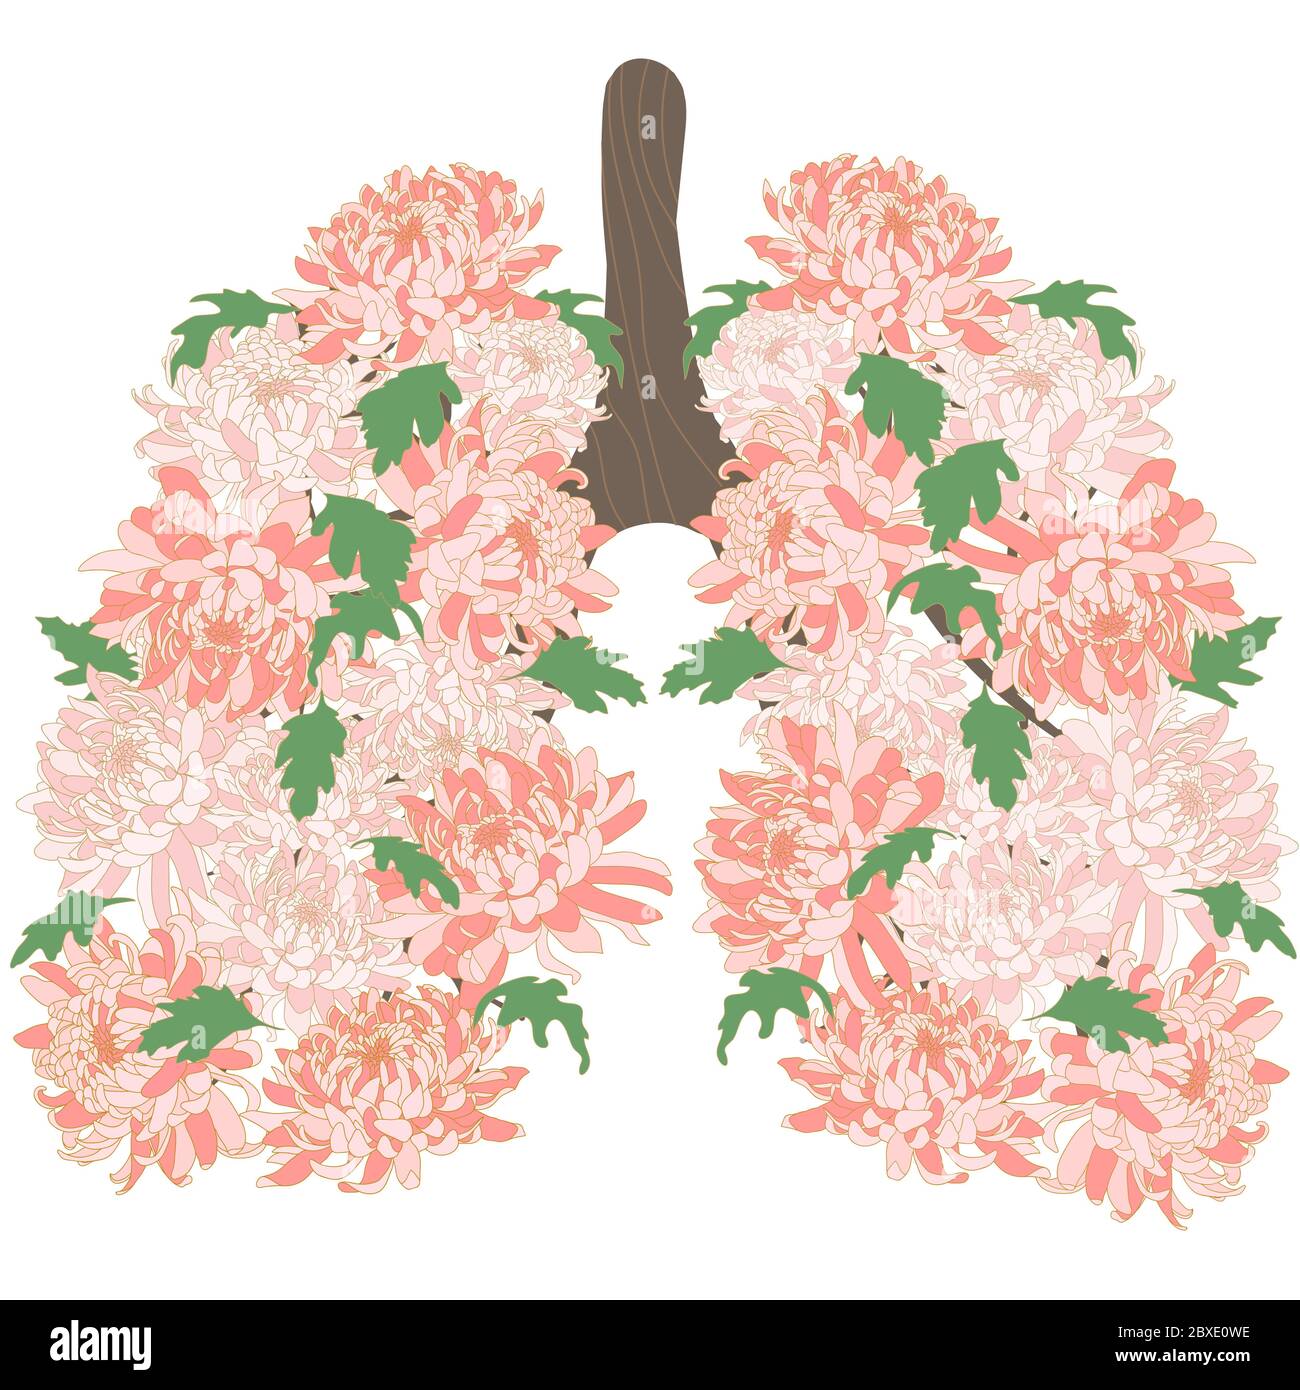 Blooming, healthy human lungs. World-wide day against pneumonia. The fight against tuberculosis in medicine. Smoker's lungs and healthy.Lungs in Stock Vector